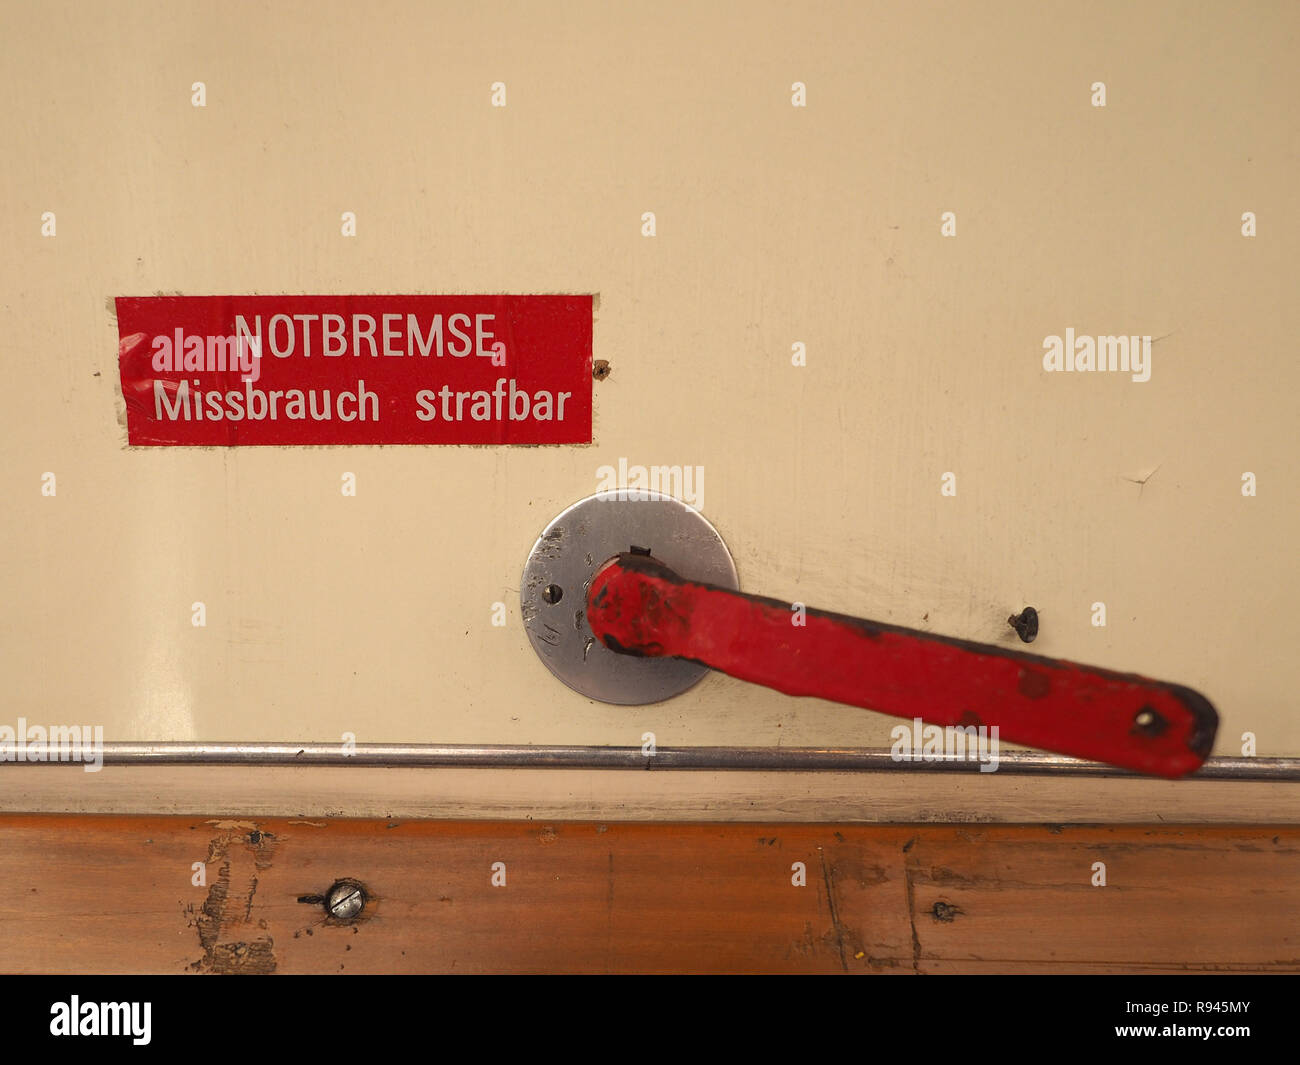 Notbremse, Missbrauch strafbar (meaning Emergengy brake, abuse punishable) sign on German tram Stock Photo